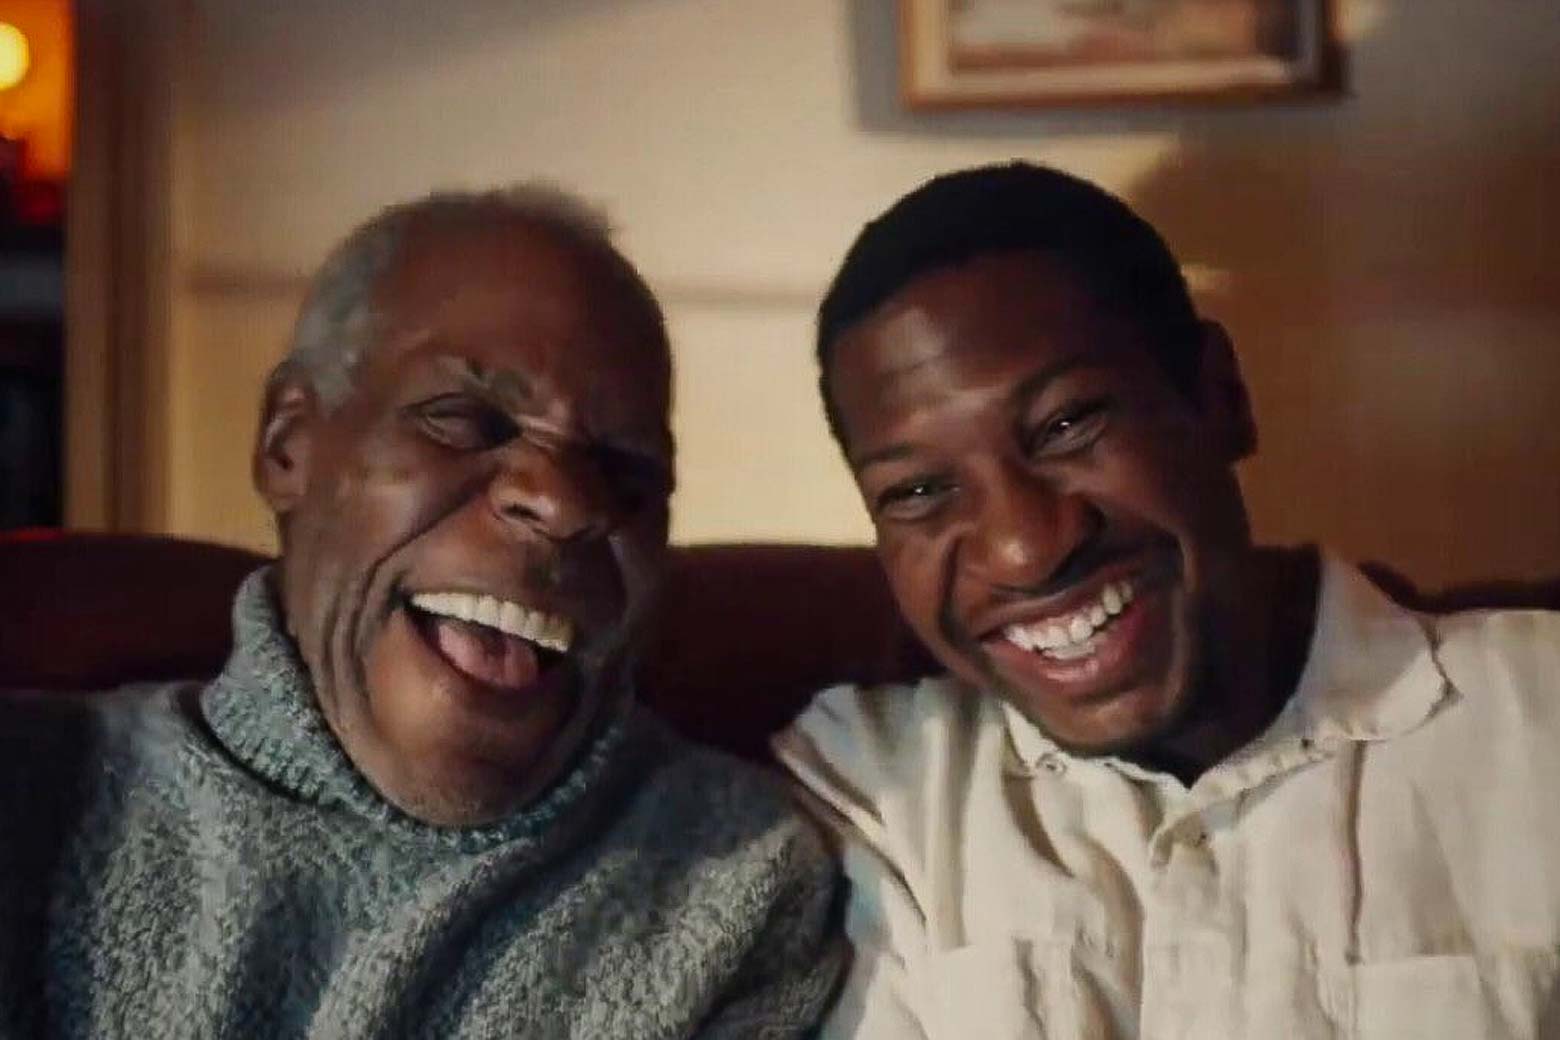 Danny Glover and Jonathan Majors laugh in this still from The Last Black Man in San Francisco.